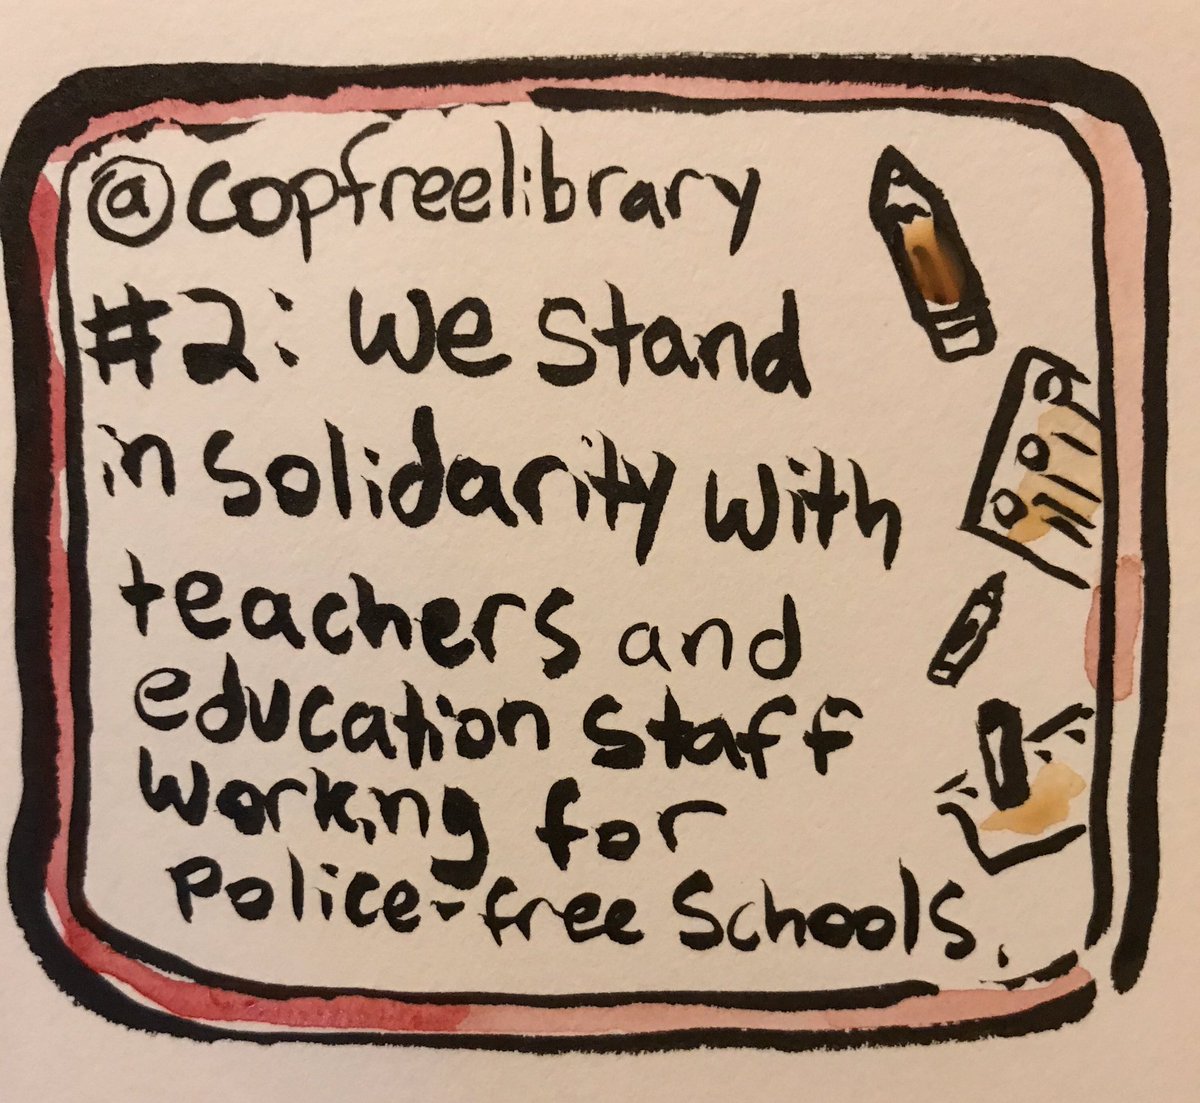 Value #2: we stand in solidarity with teachers and education workers pushing for schools to divest from police.